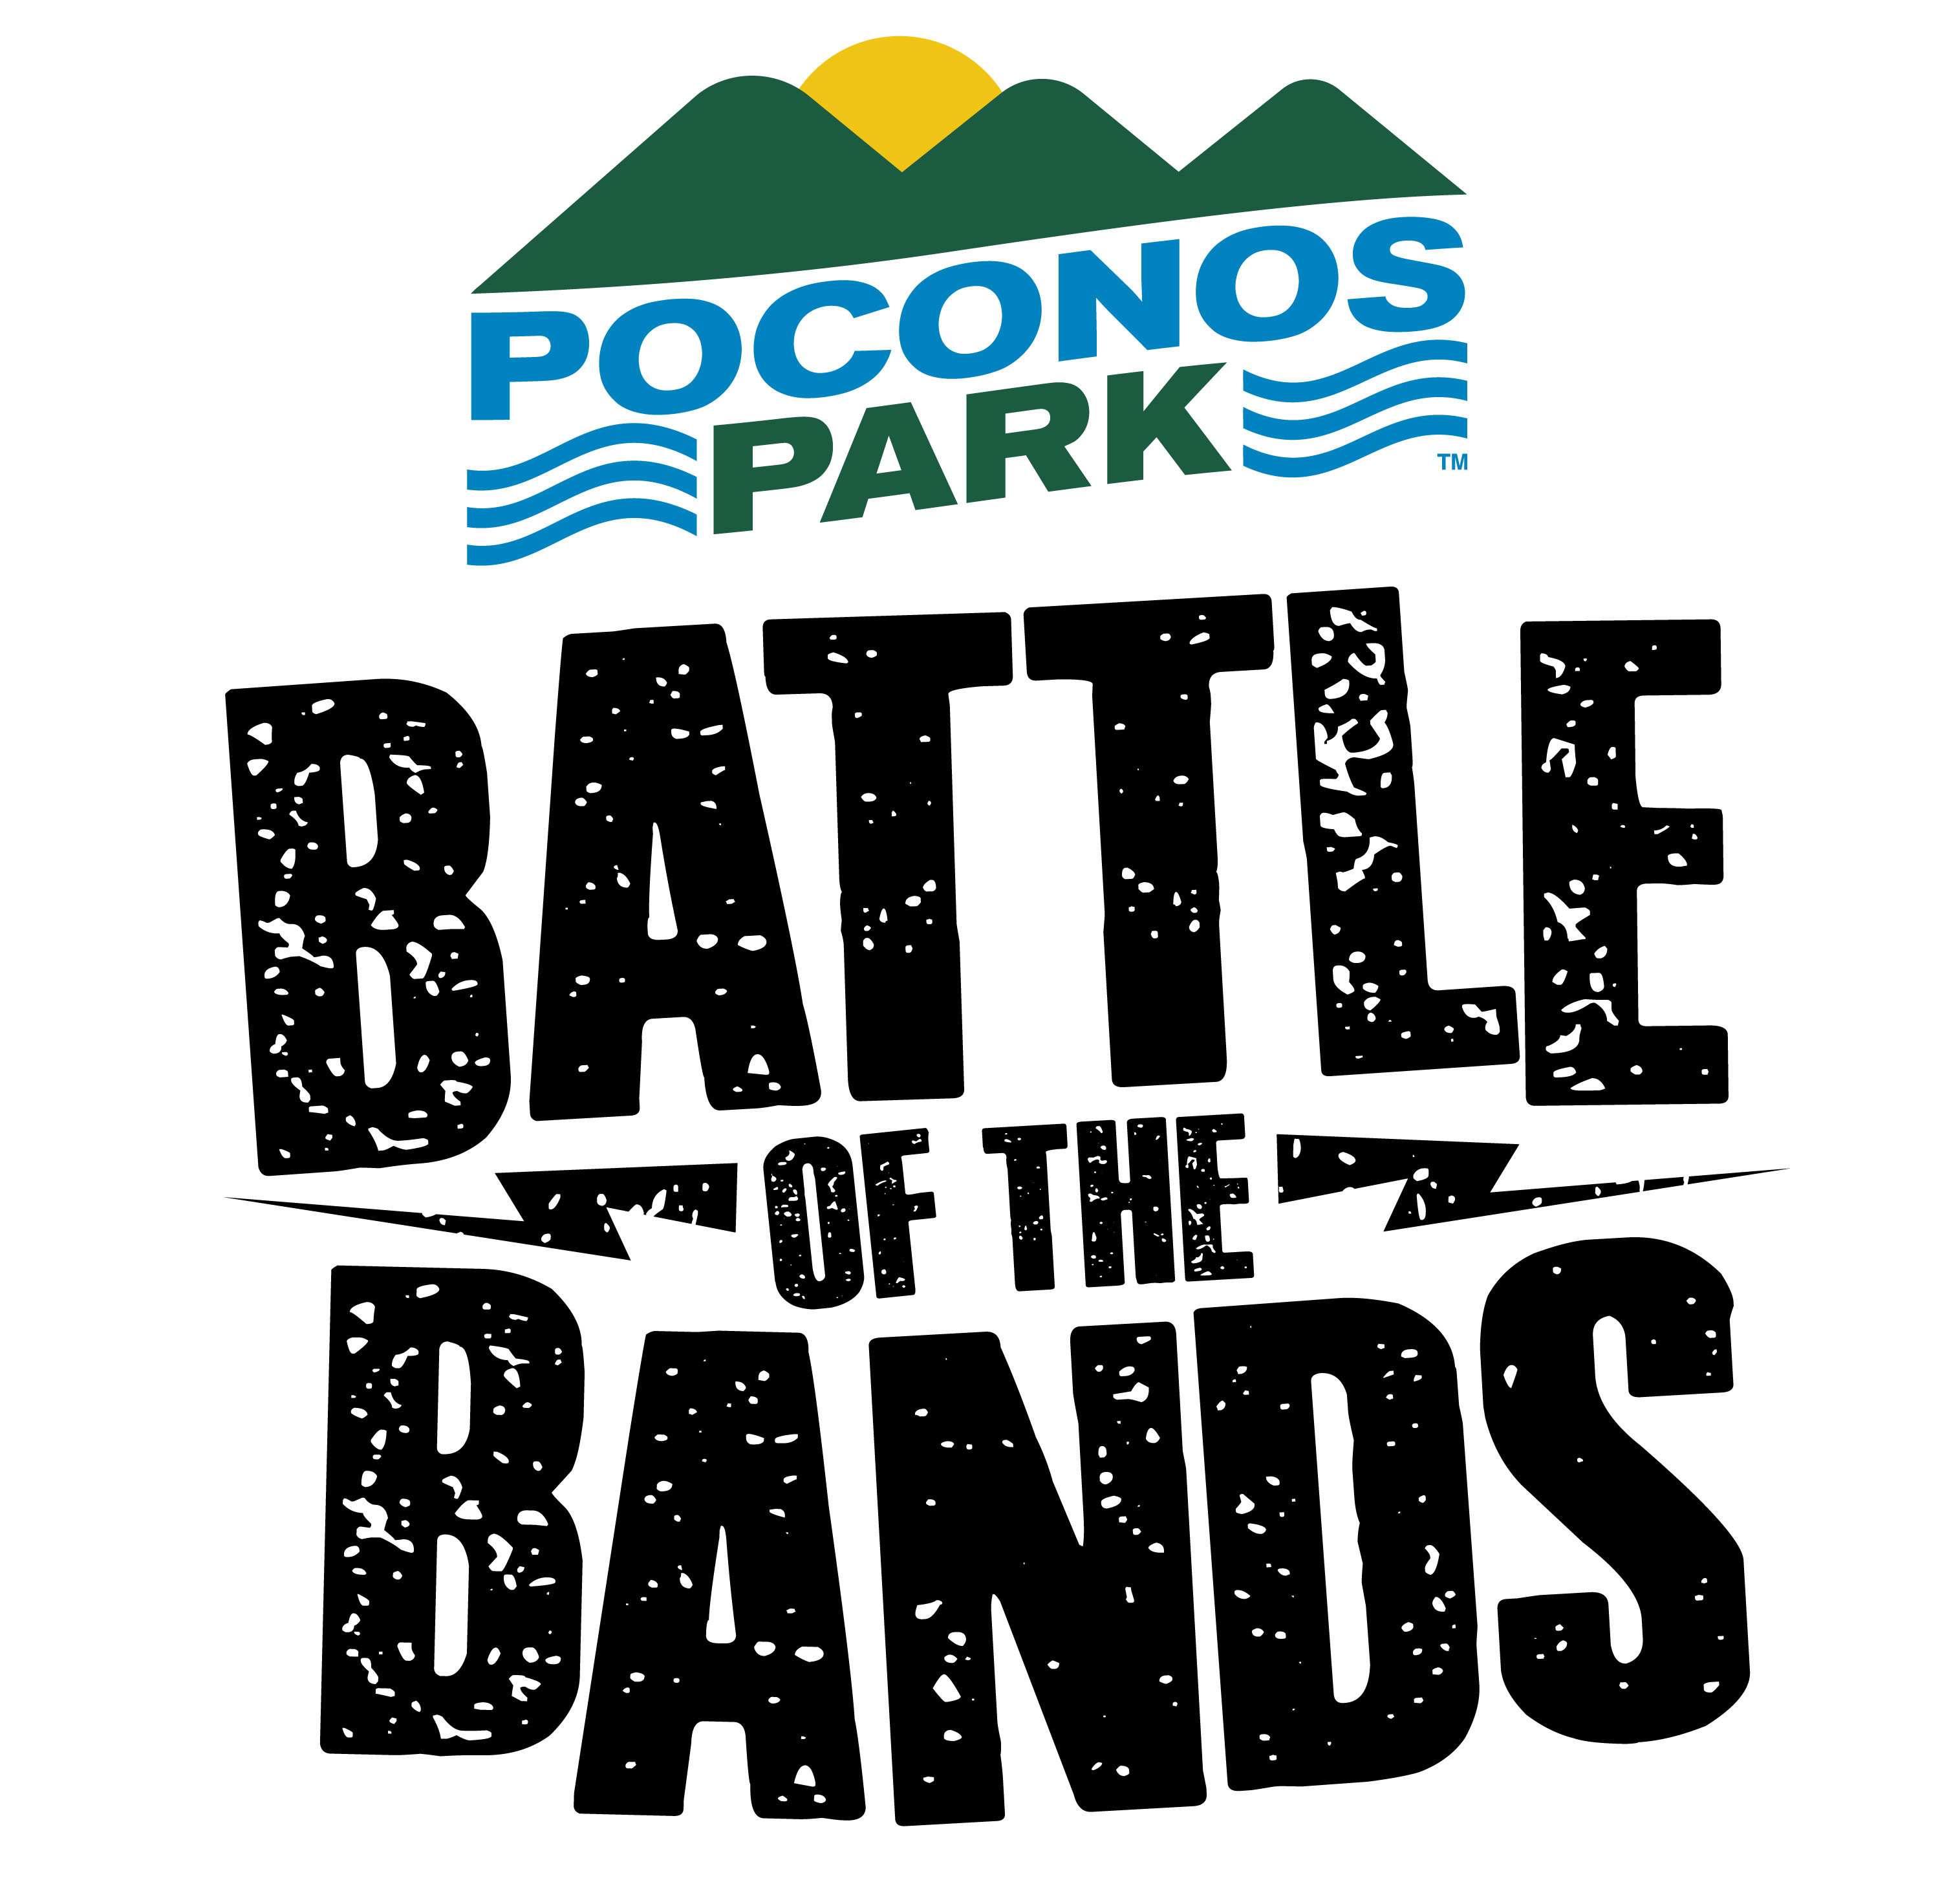 From the Roots Announces Nationwide POCONOS PARK BATTLE OF THE BANDS